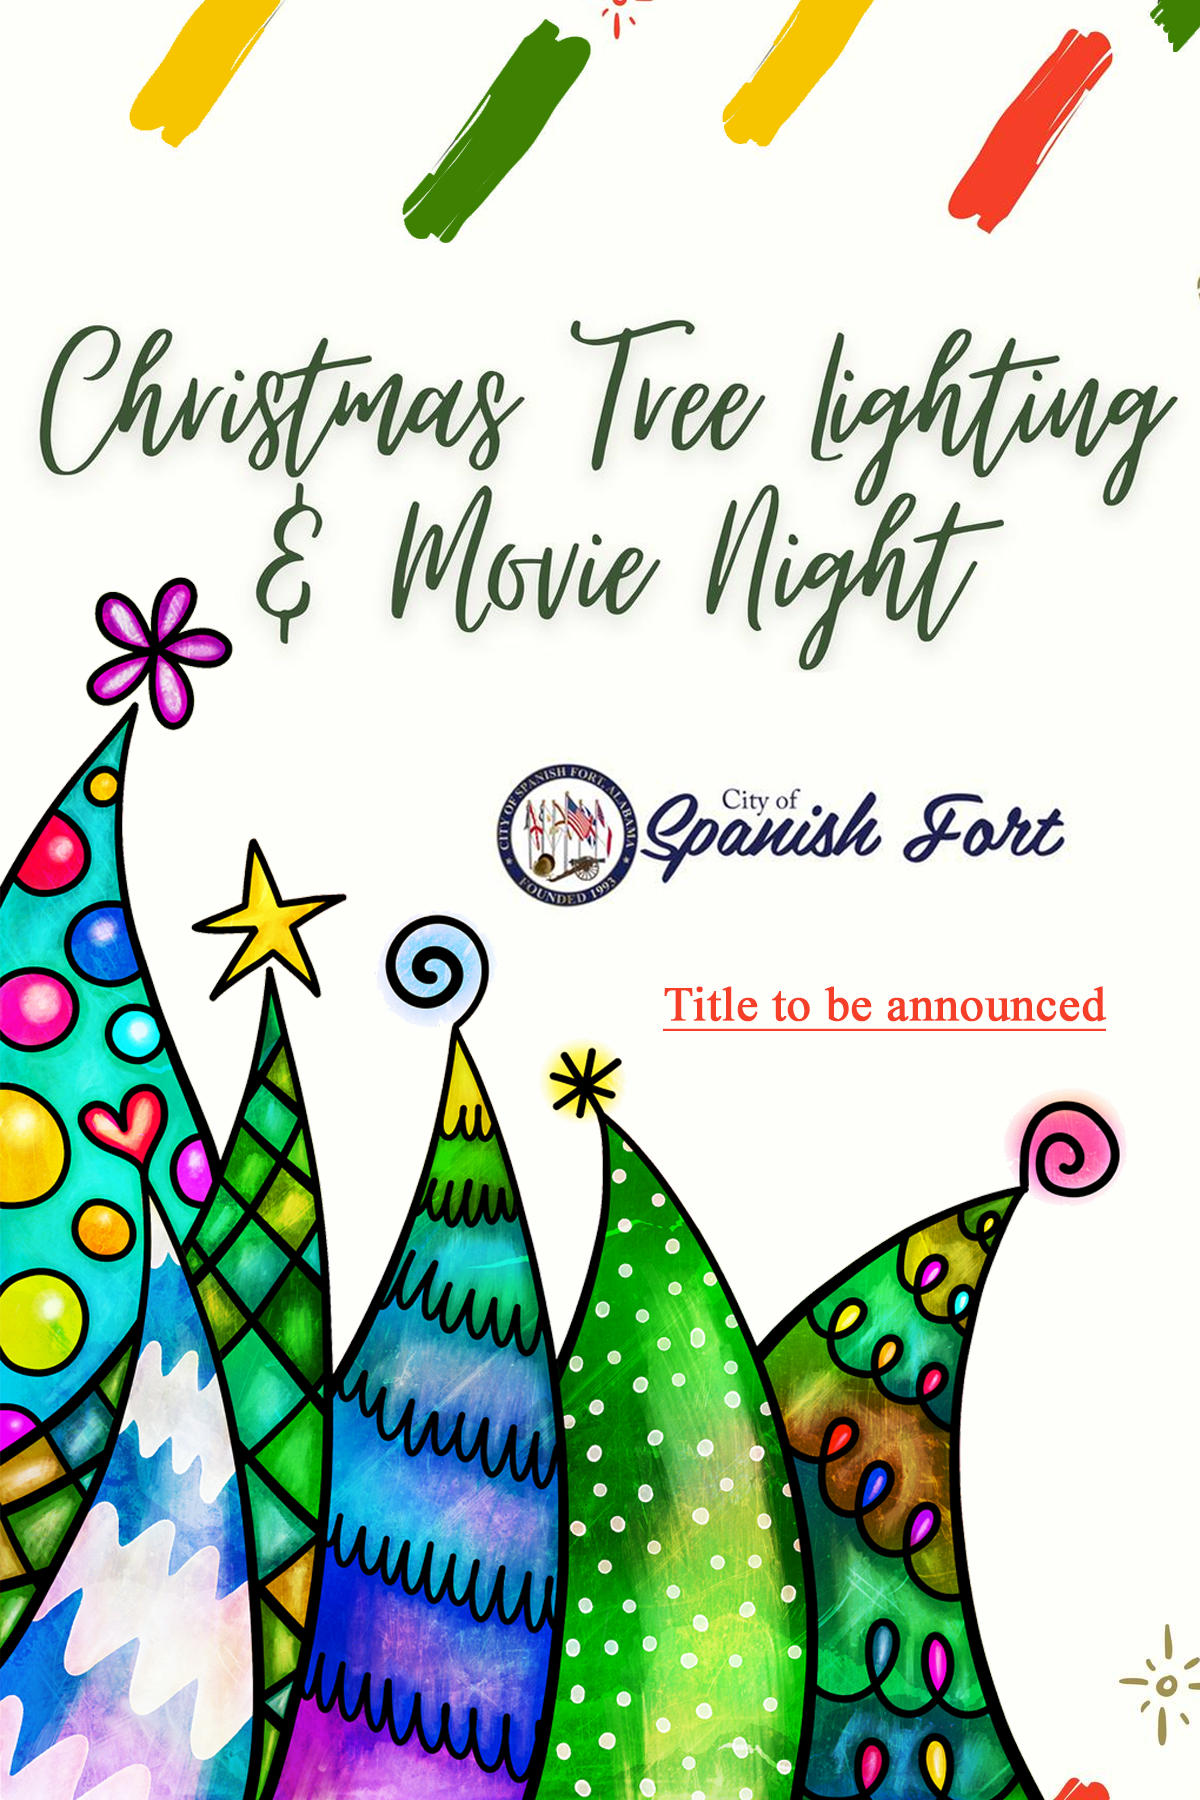 City of Spanish Fort Christmas Tree Lighting and Movie Night. Movie title to be announced at a later date.